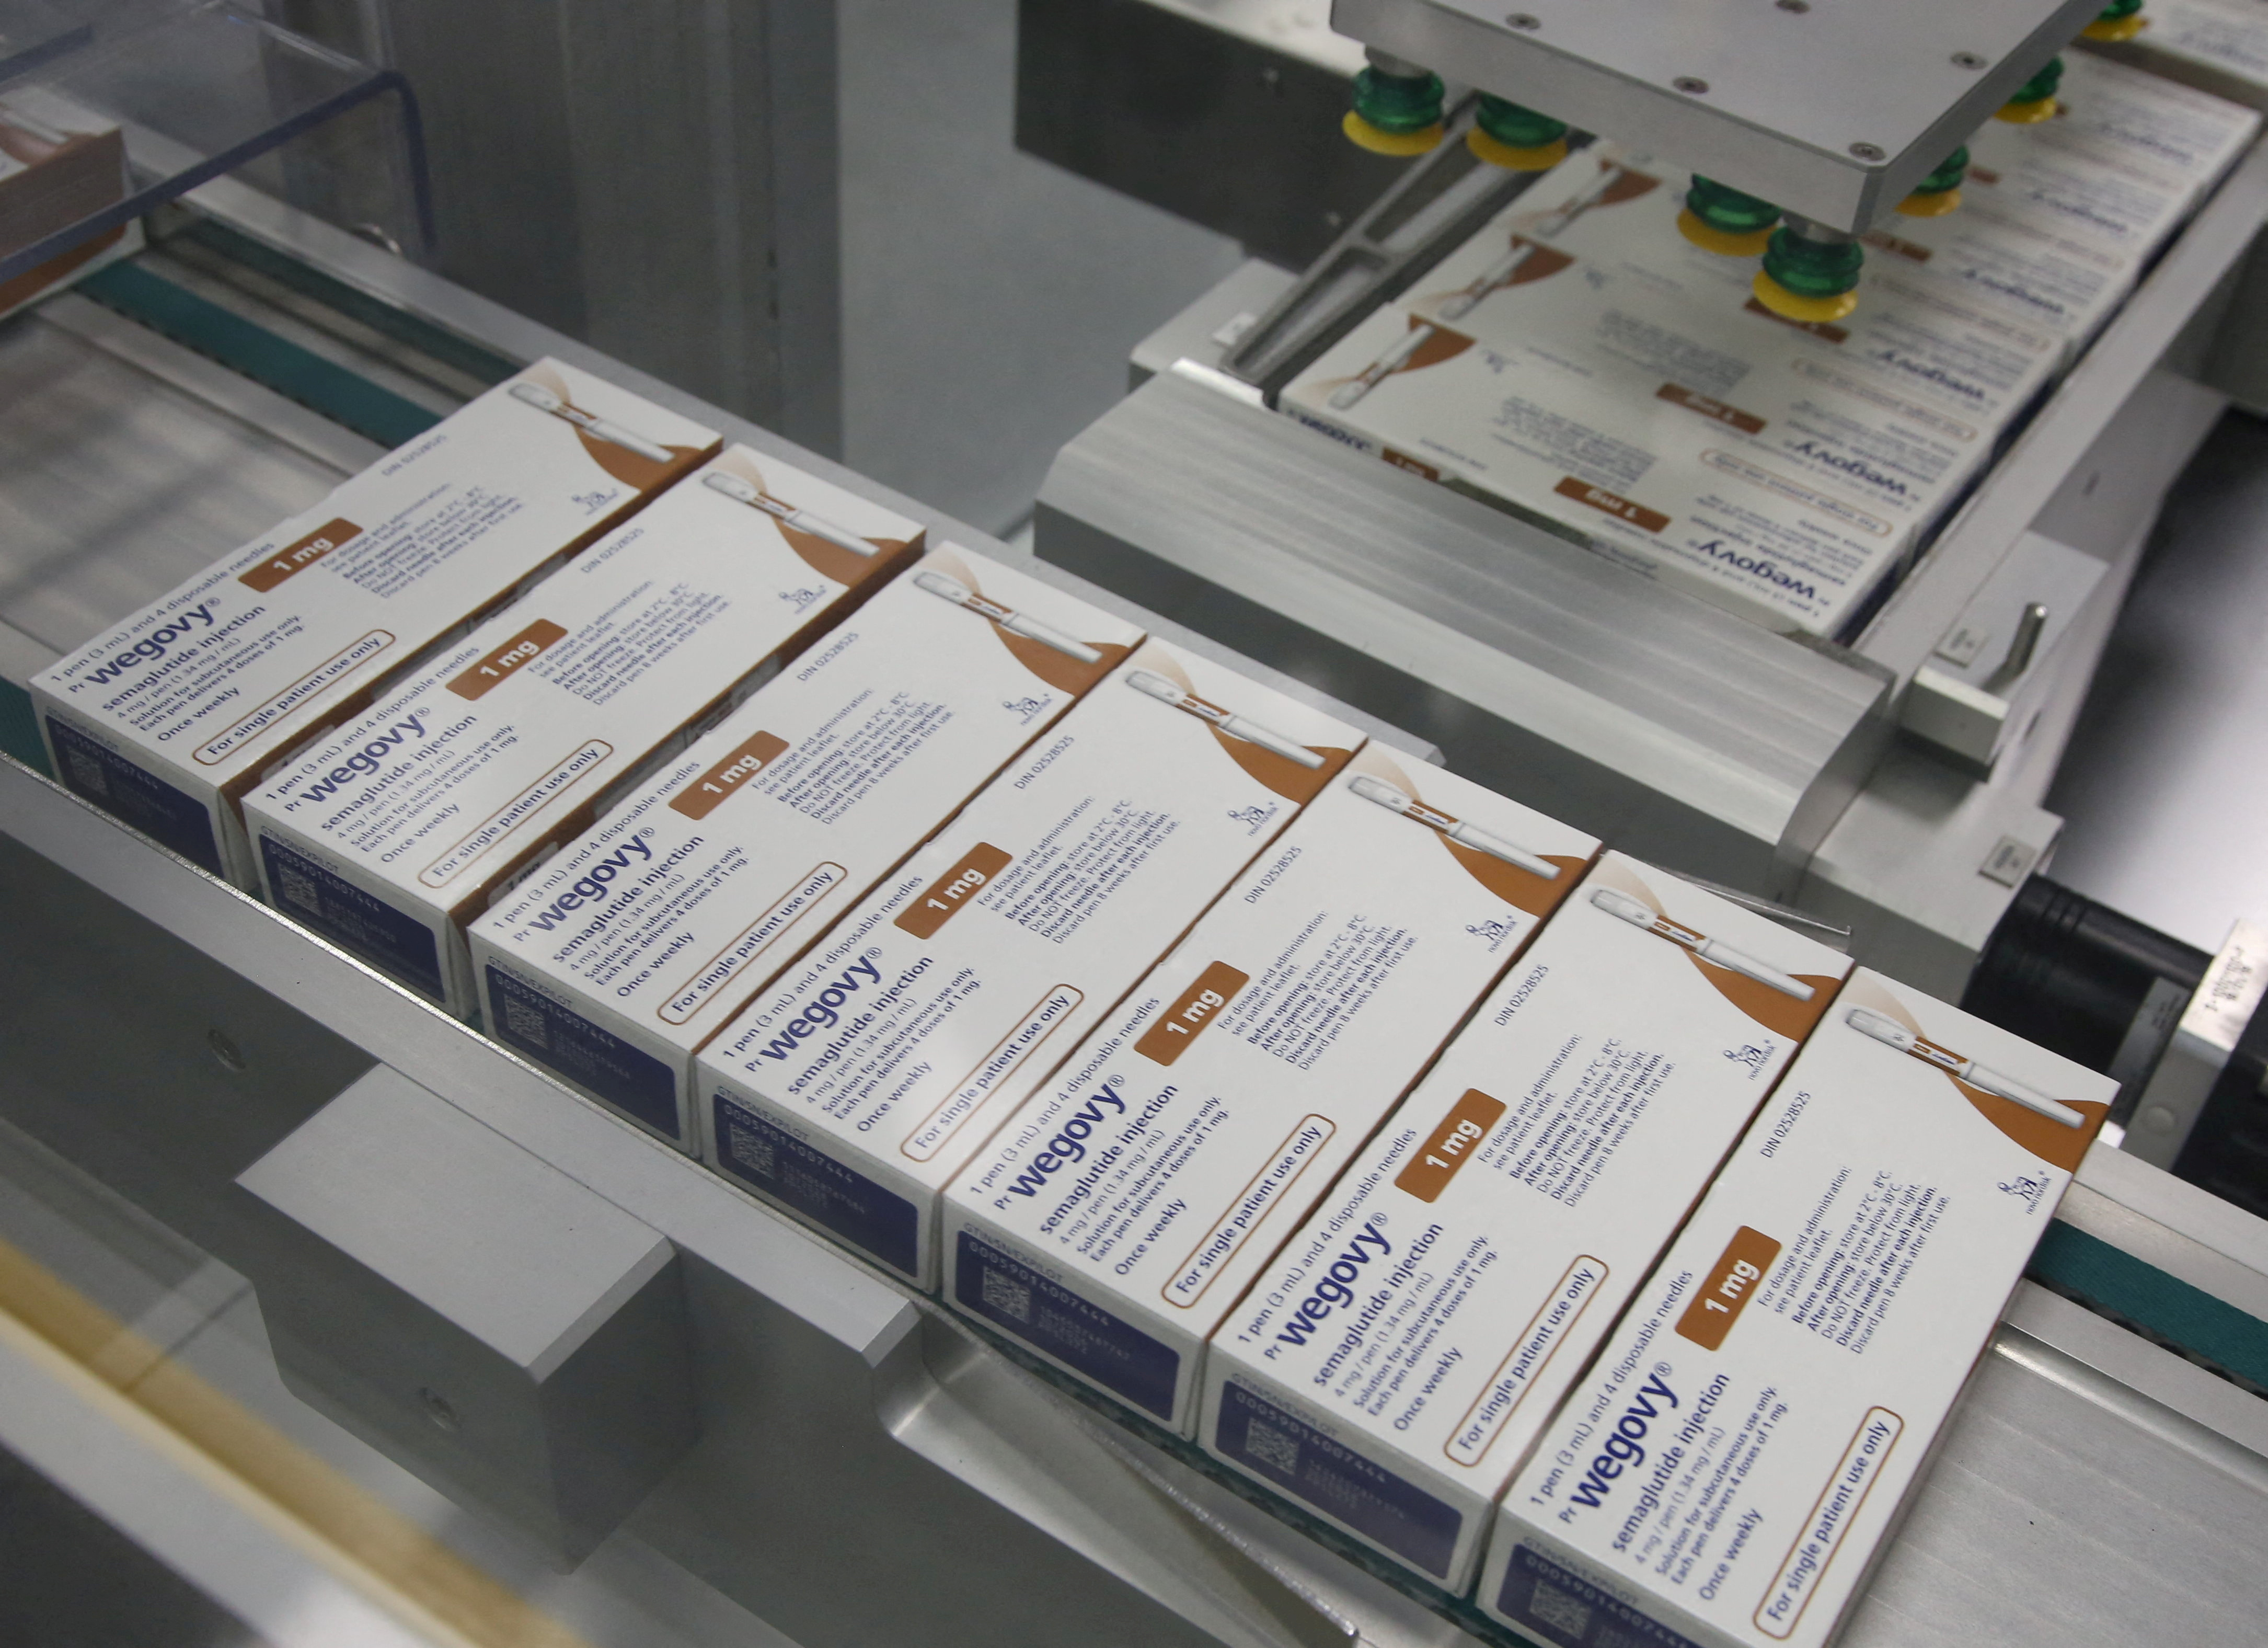 Boxes of Wegovy move along a packaging line at Novo Nordisk's facility in Hillerod